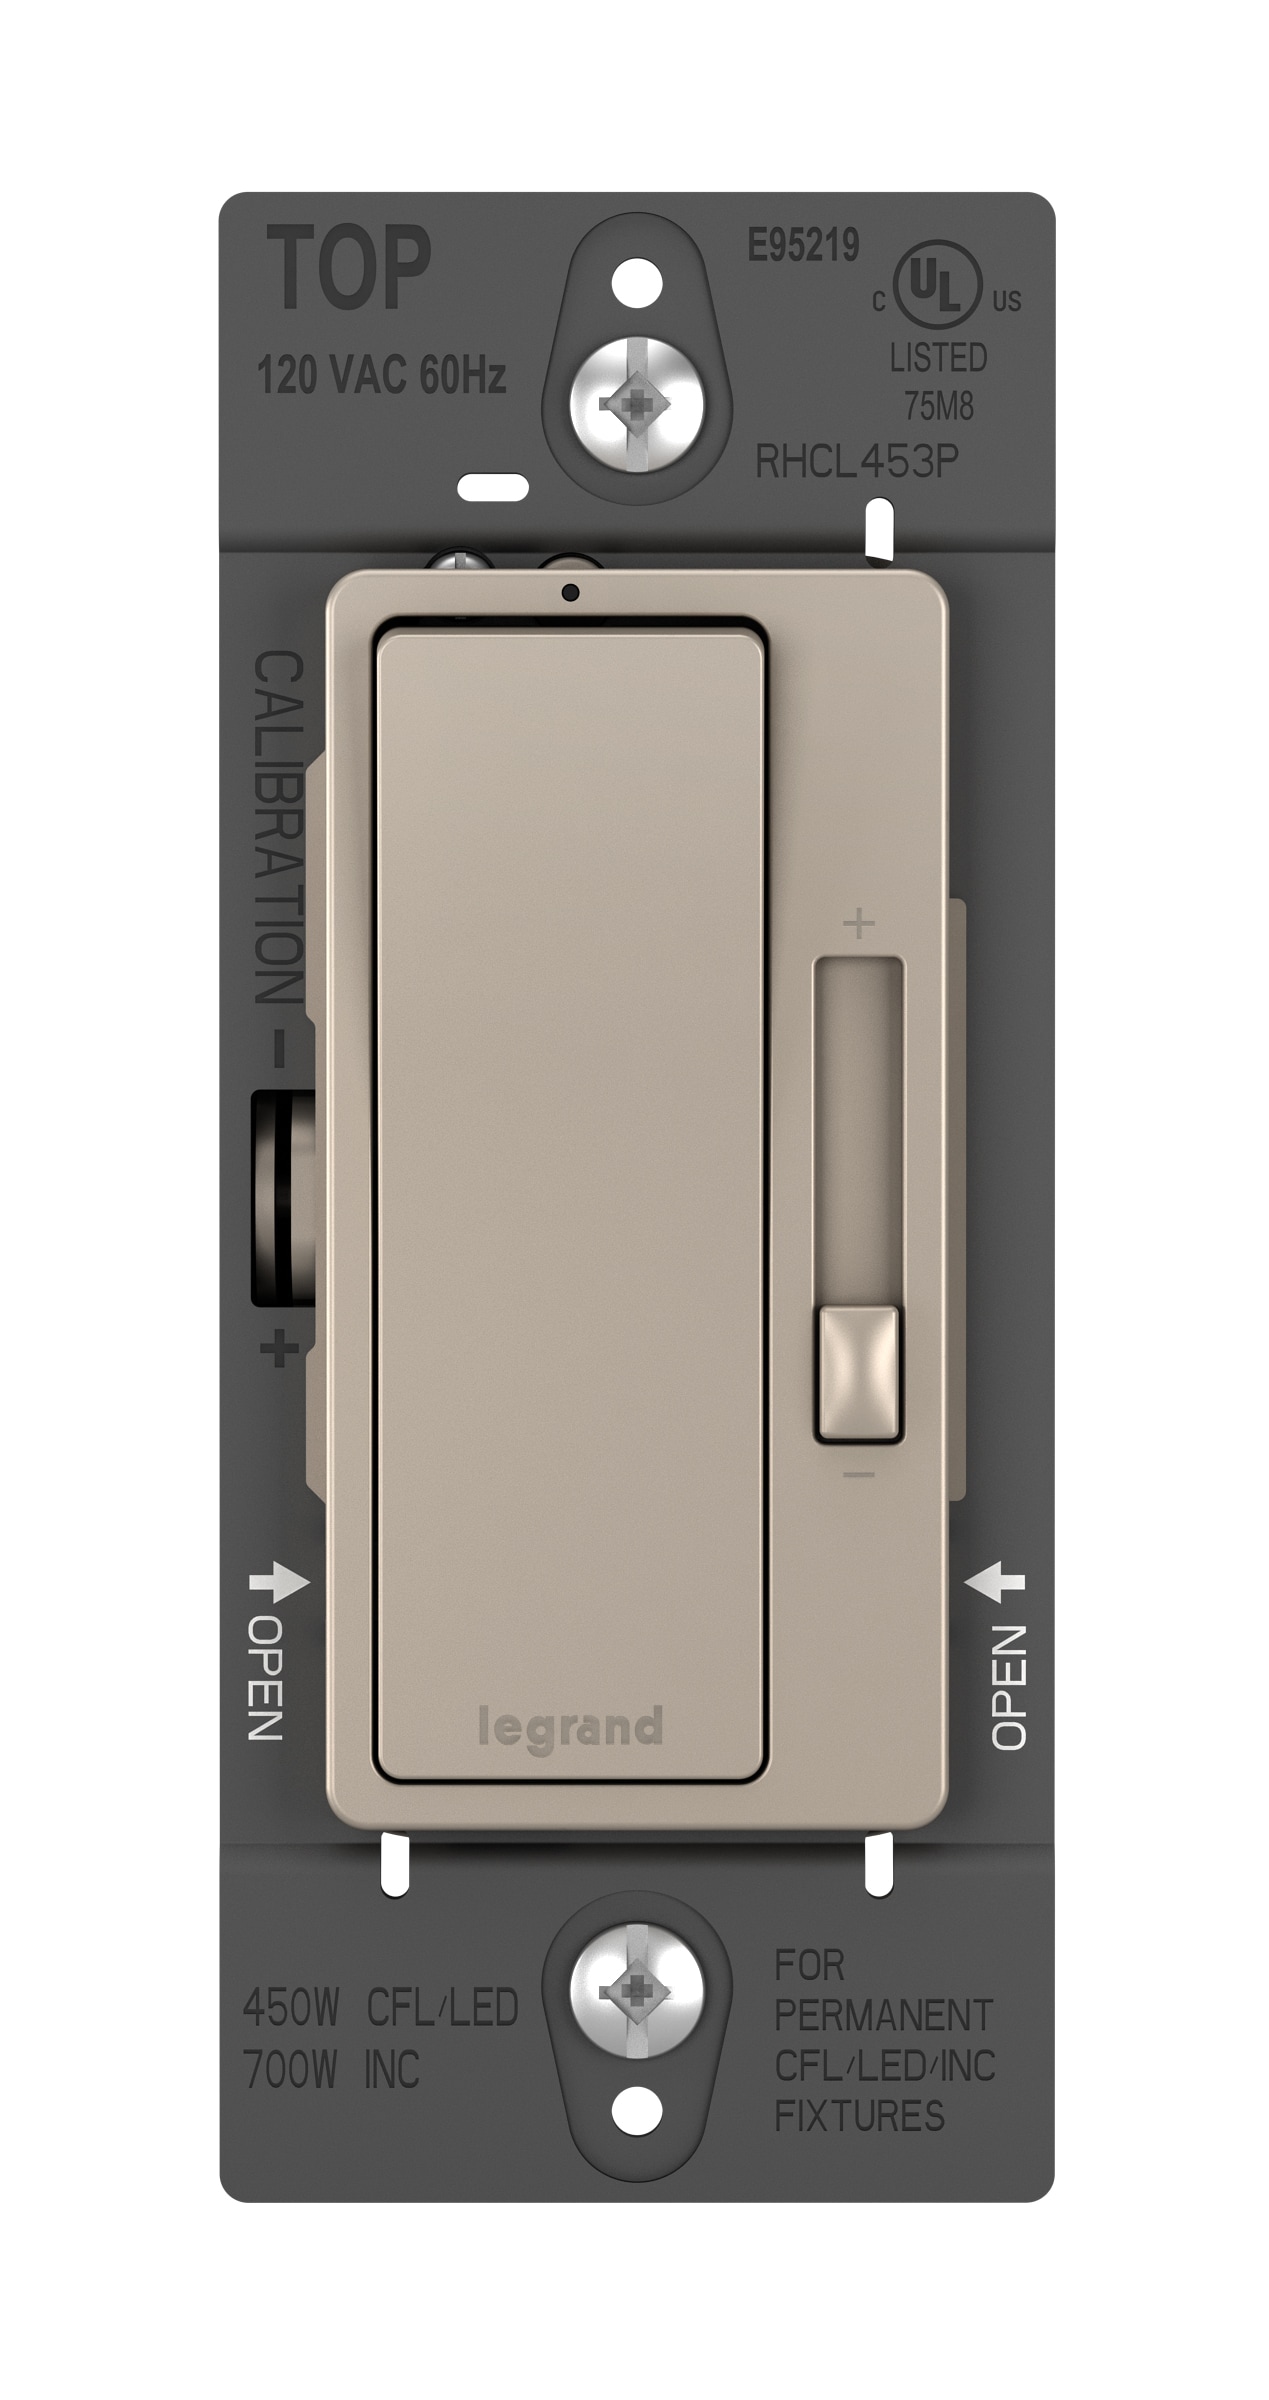 Legrand radiant Single-Pole/3-Way Illuminated Decorator Light Dimmer, in the Light Dimmers at